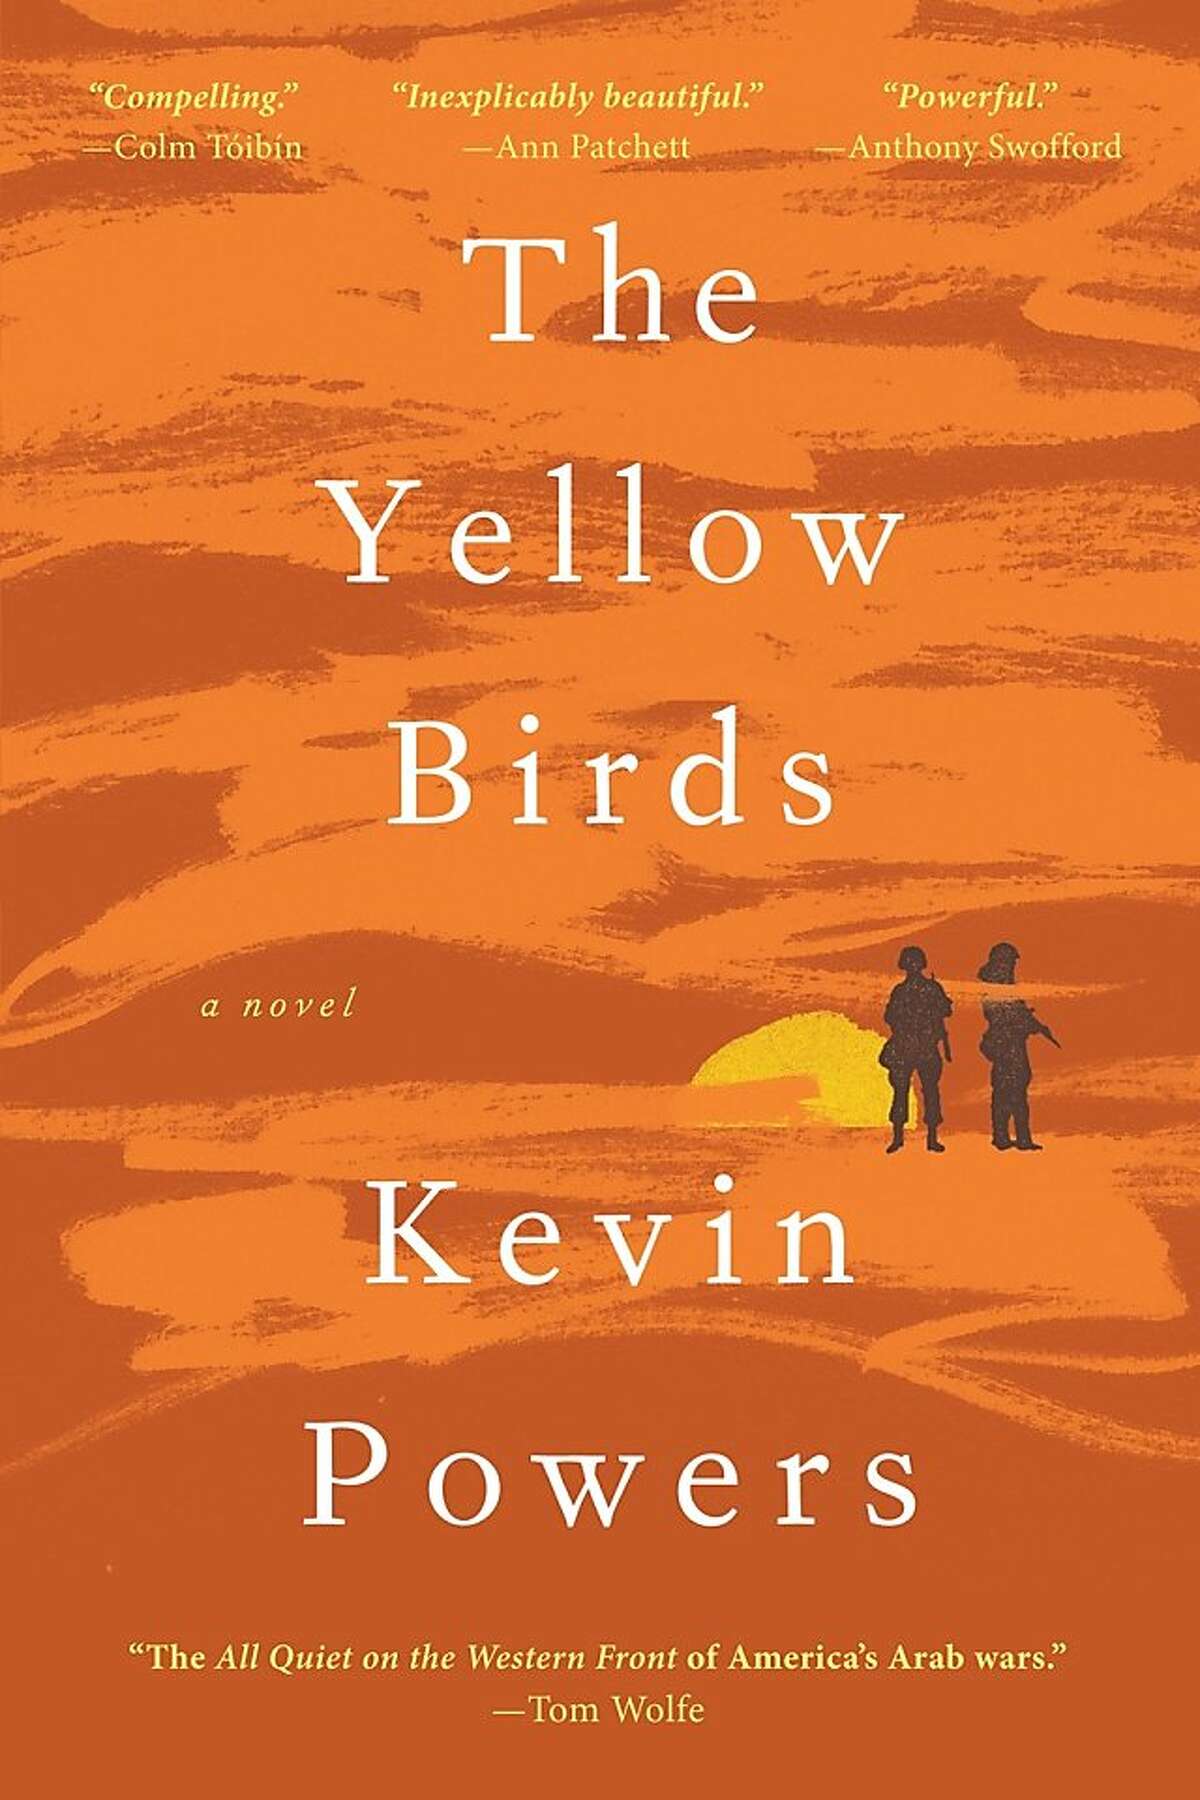 The Yellow Birds, by Kevin Powers